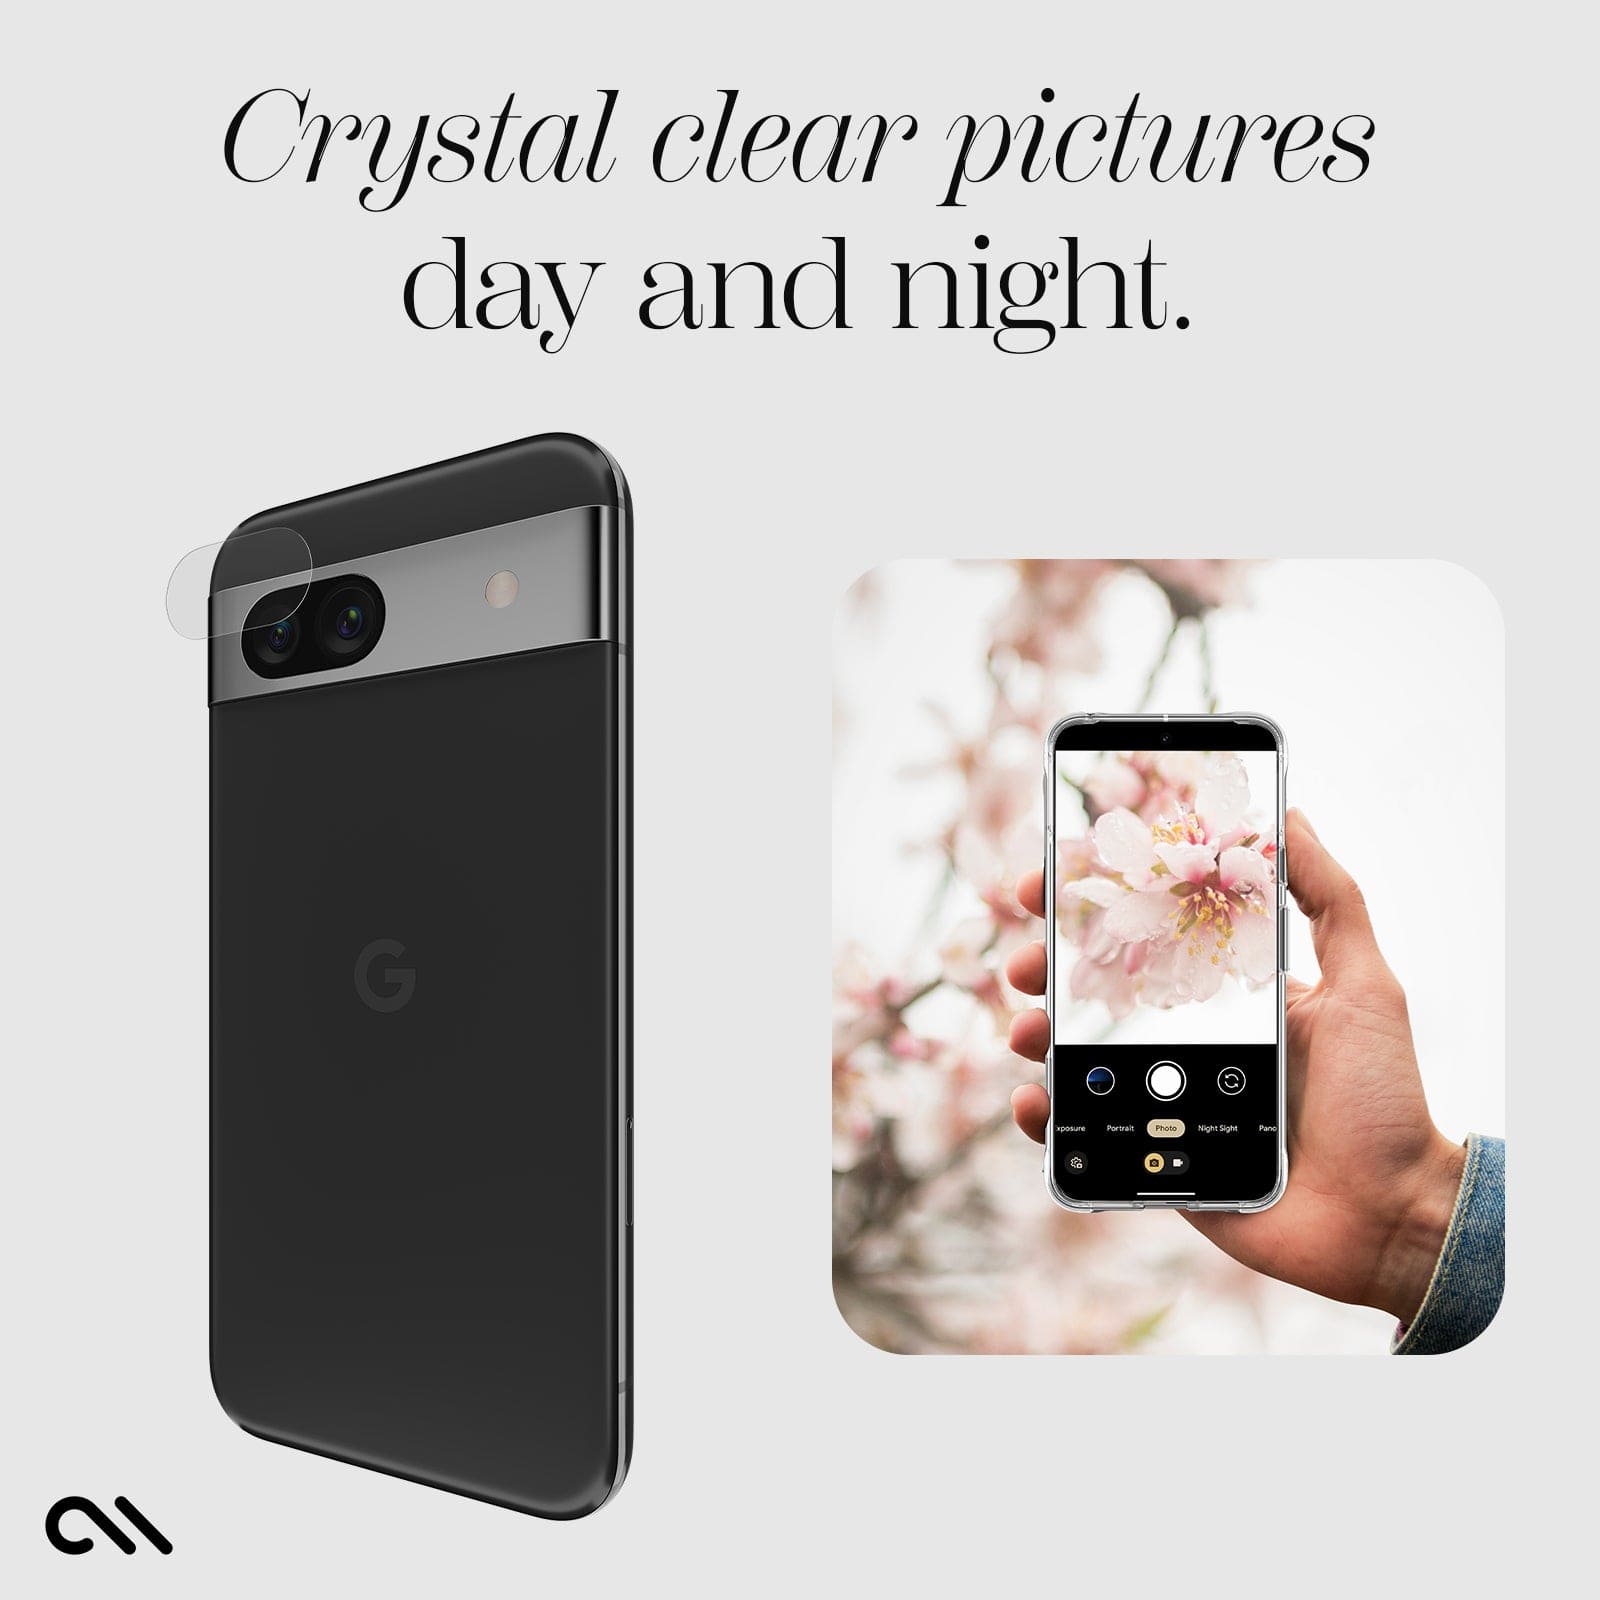 crystal clear pictures day and night